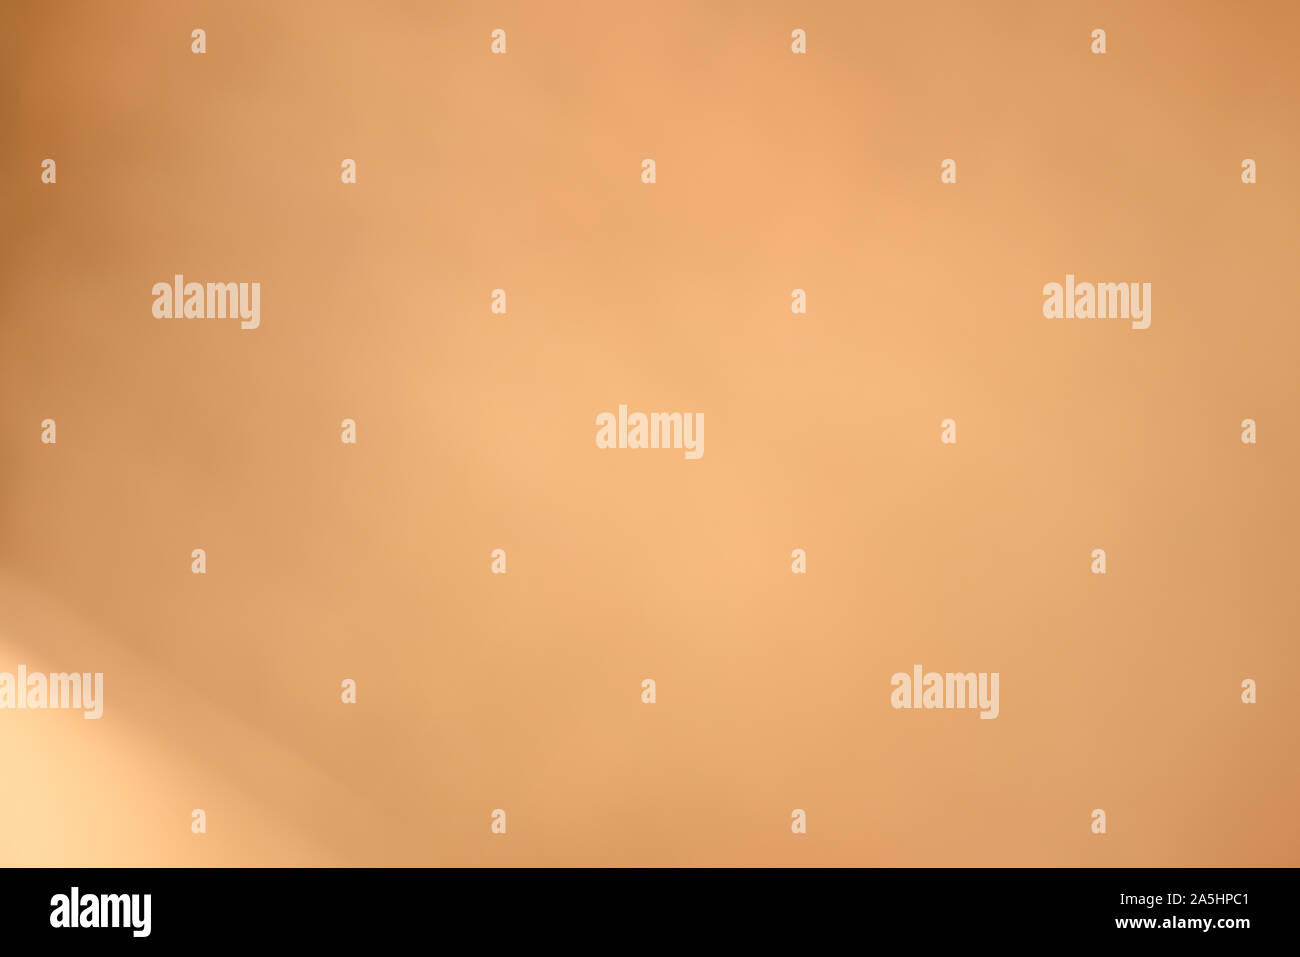 Gold and orange colour gradient blur for background image Stock Photo